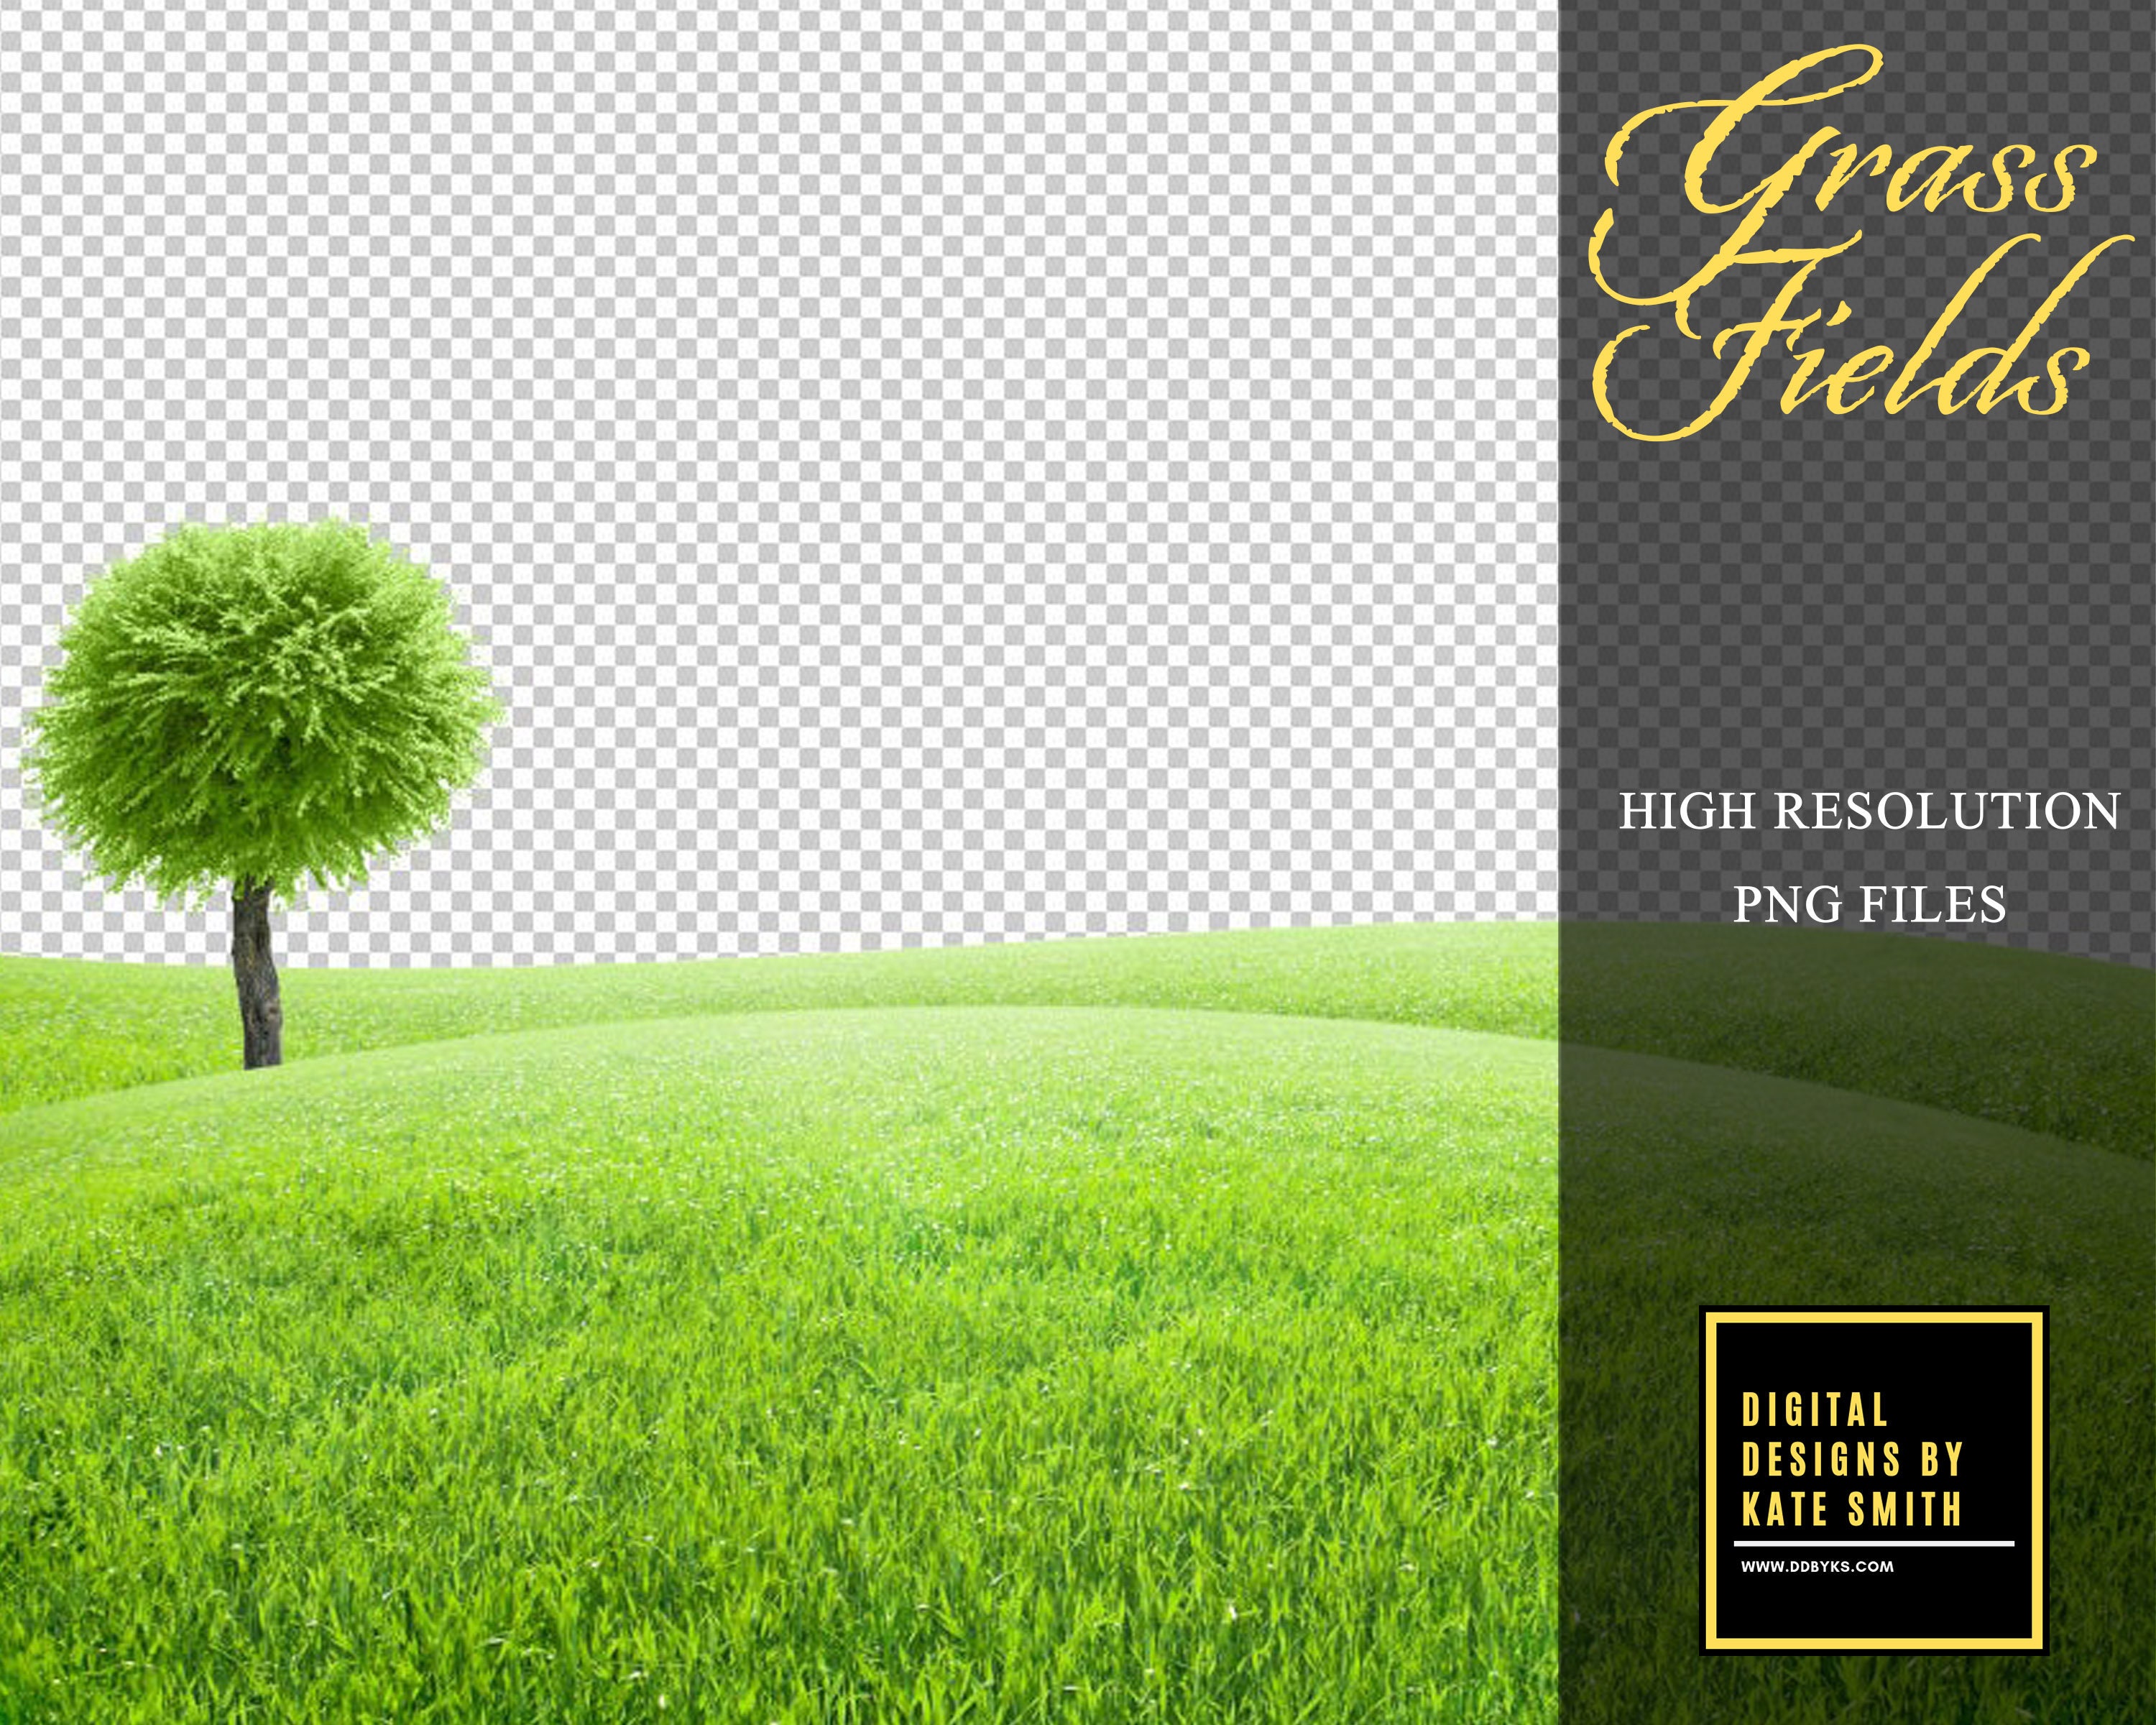 5 X Grass Field Overlays Extra Large Files High Resolution - Etsy